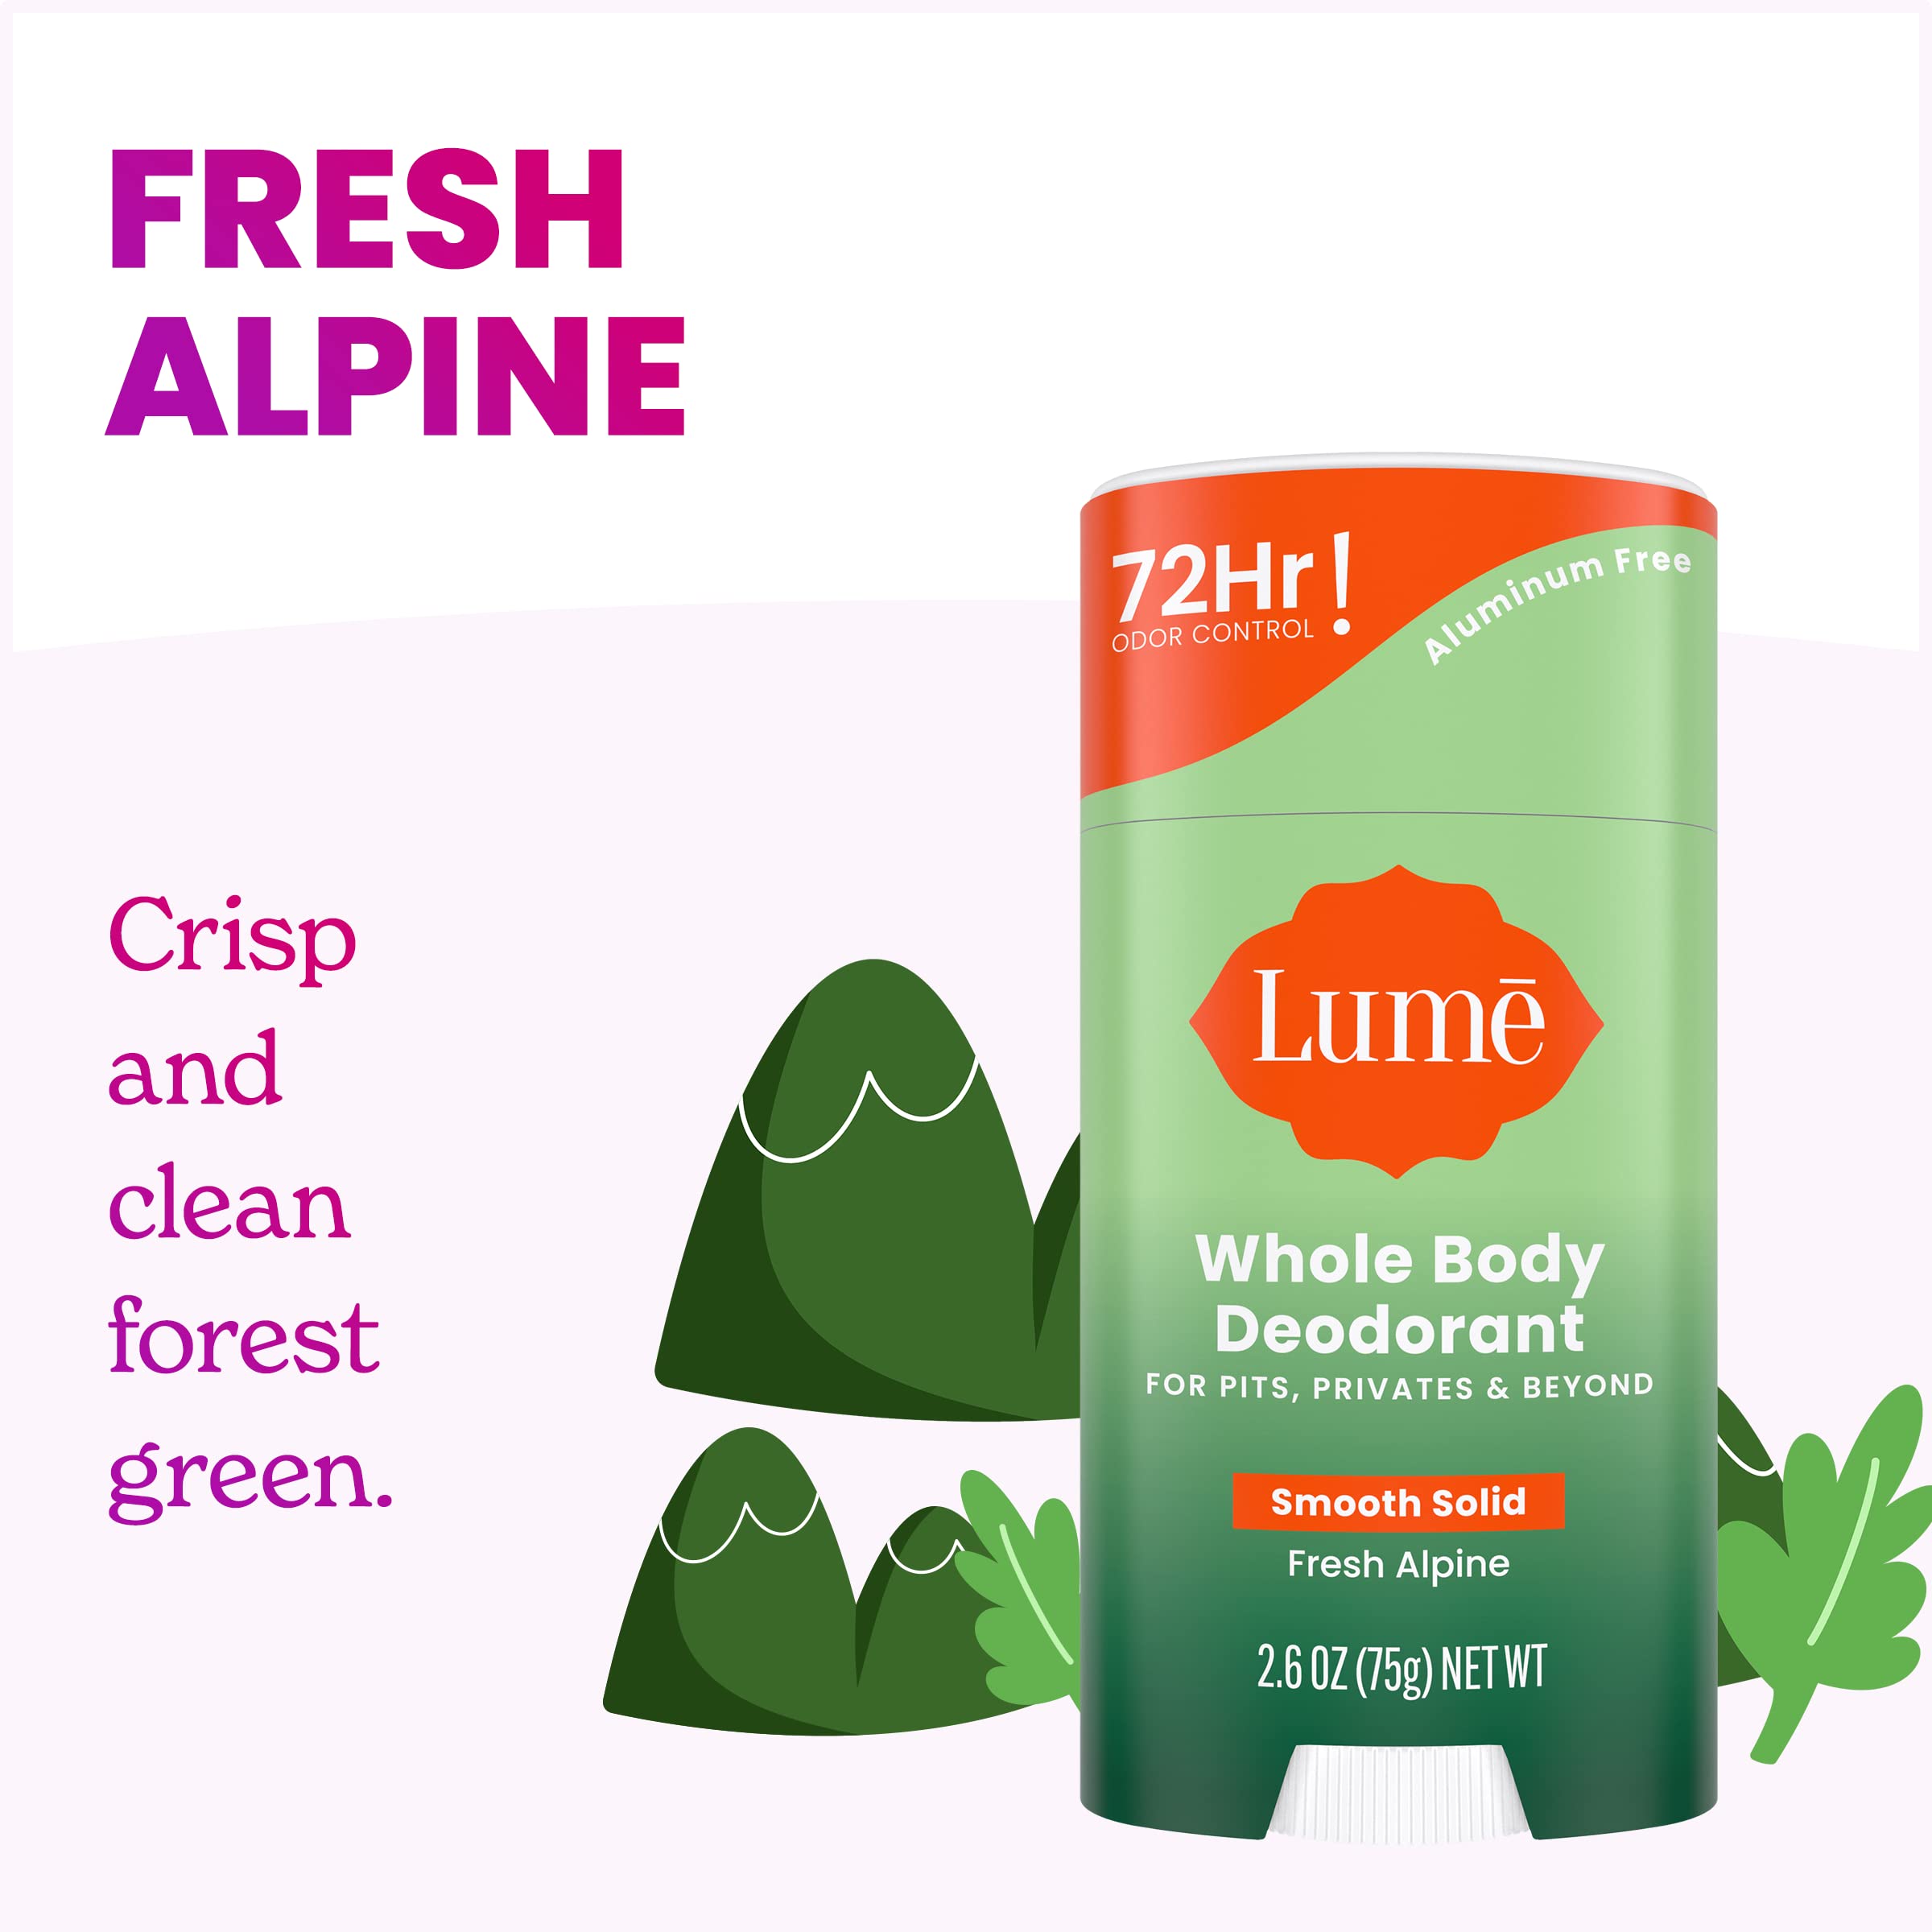 Lume Whole Body Deodorant - Smooth Solid Stick - 72 Hour Odor Control - Aluminum Free, Baking Soda Free and Skin Safe - 2.6 Ounce (Fresh Alpine)